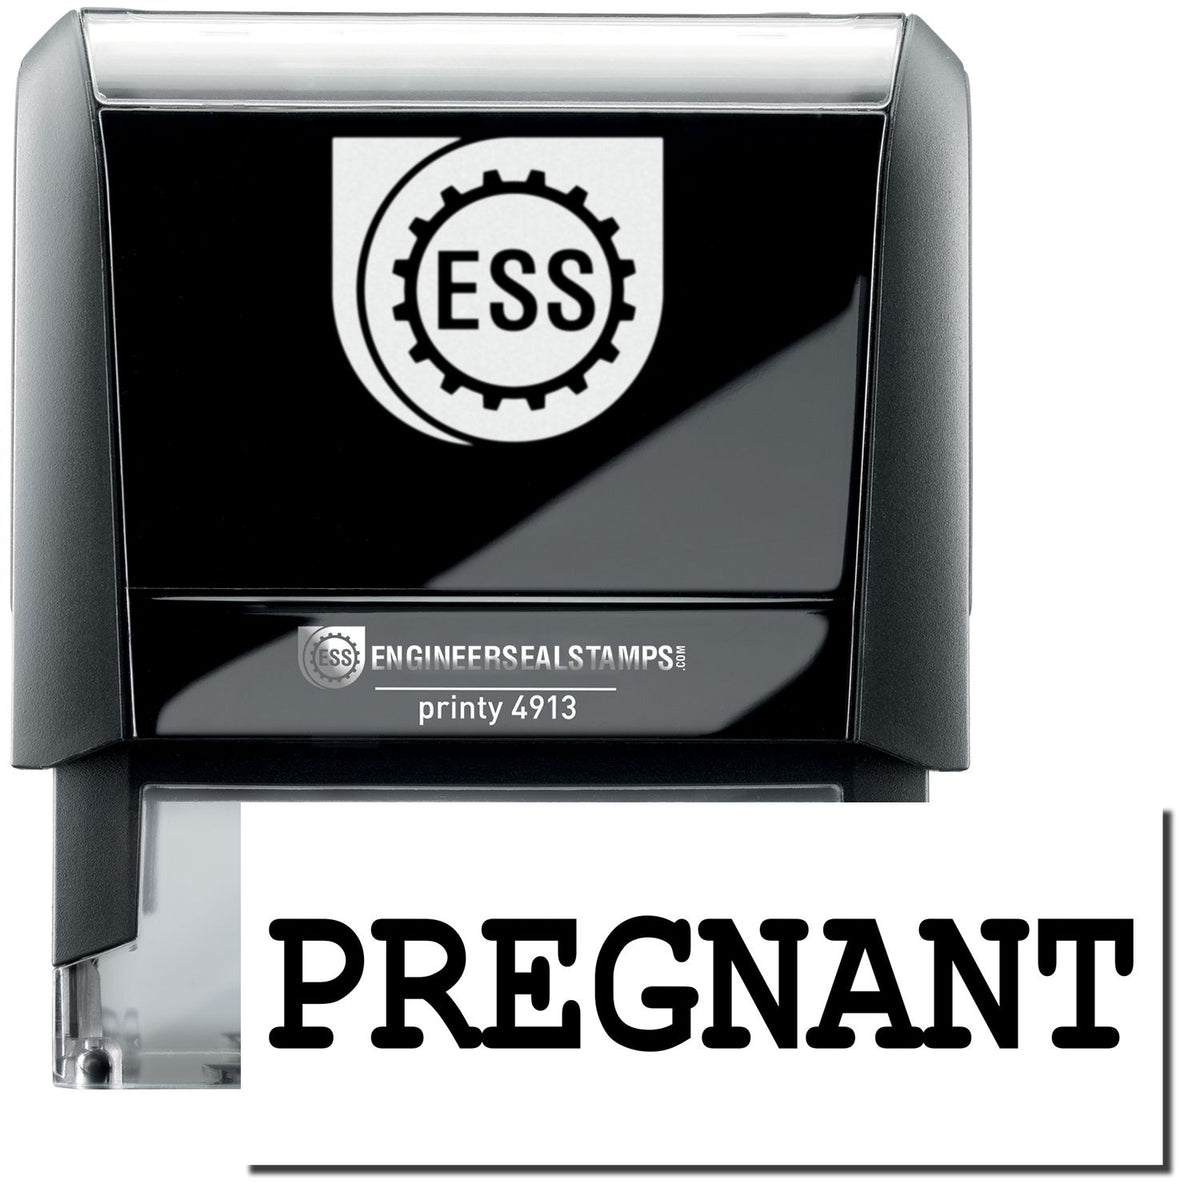 A self-inking stamp with a stamped image showing how the text &quot;PREGNANT&quot; in a large bold font is displayed by it.